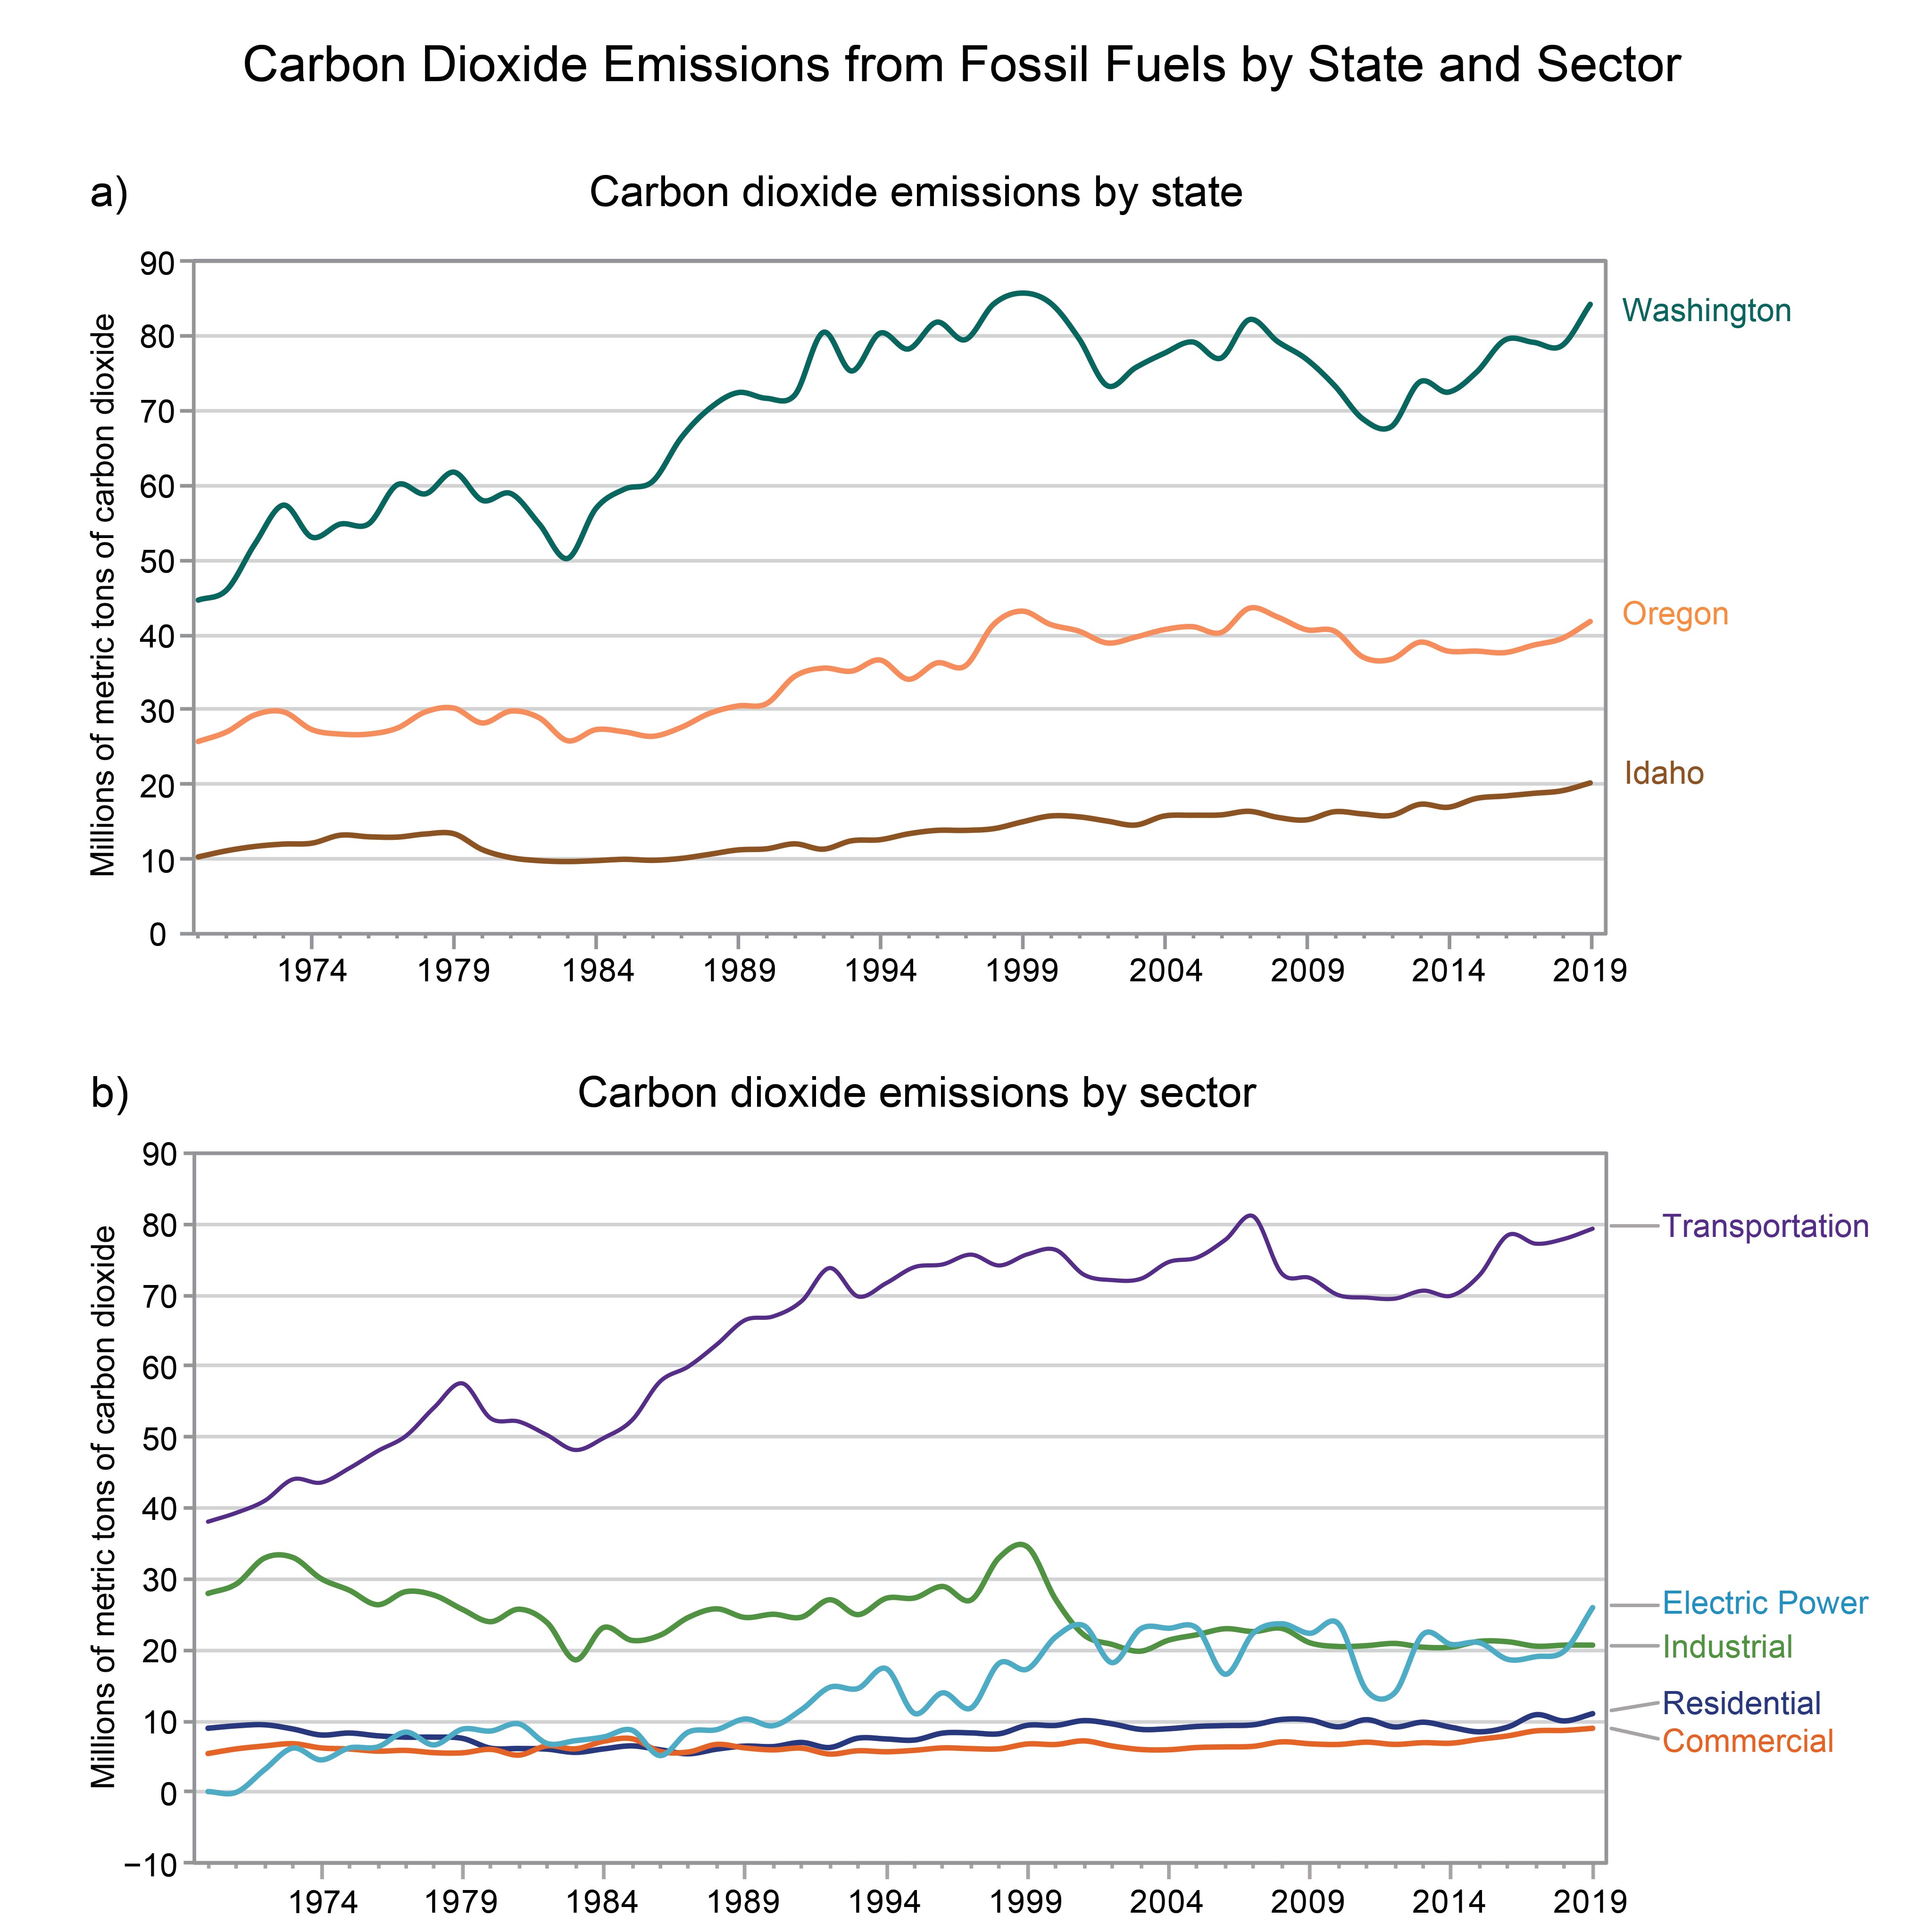 Carbon Dioxide Emissions from Fossil Fuels by State and Sector